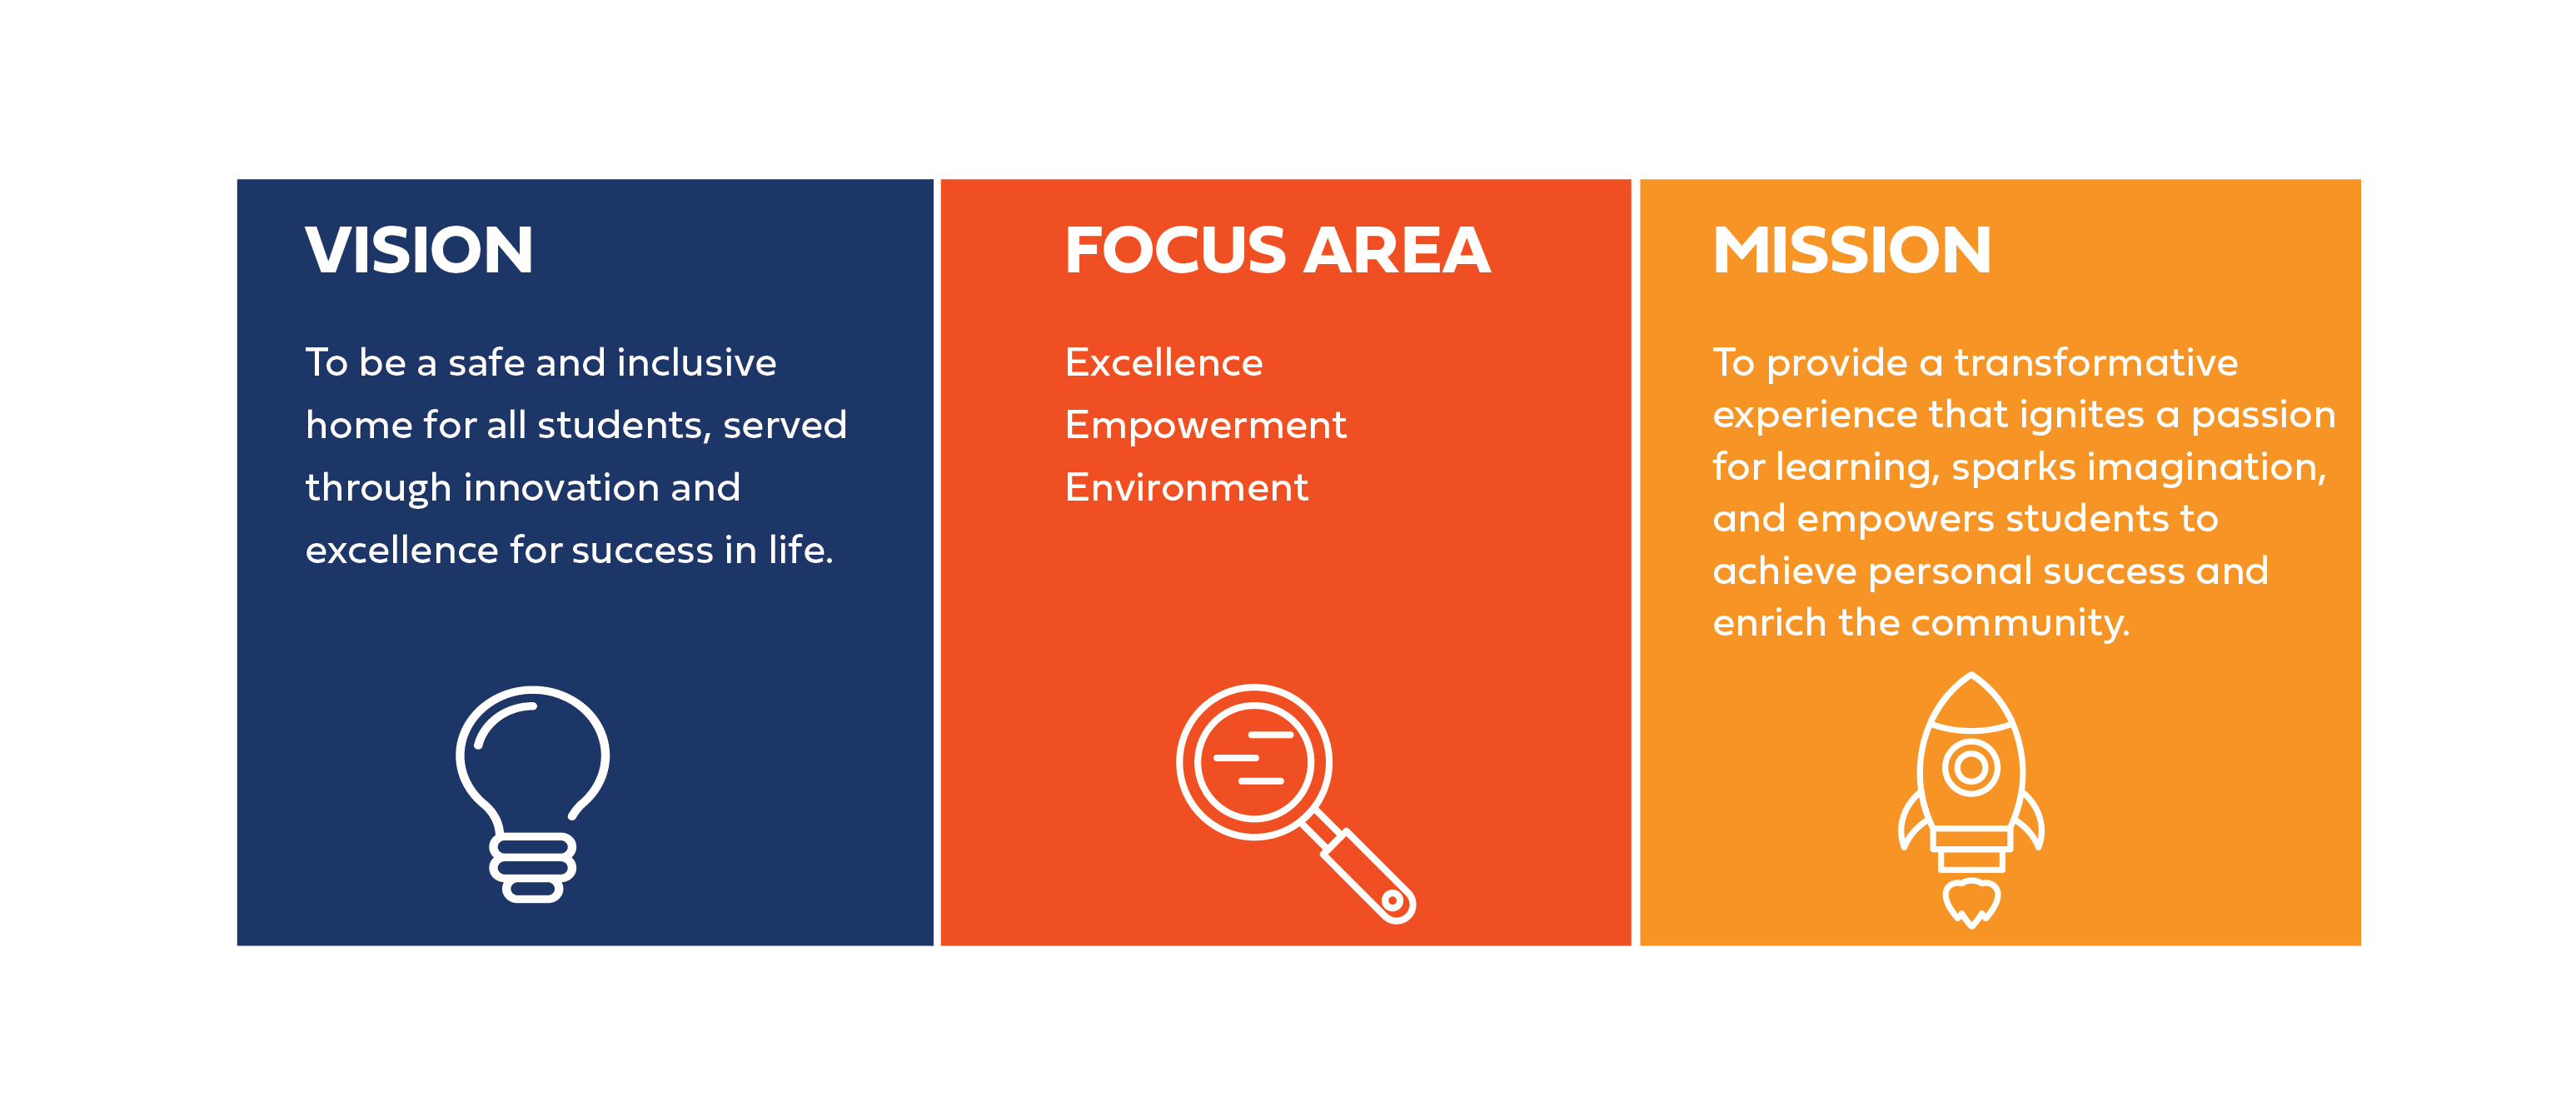 MISSION AND VISION STATEMENTS